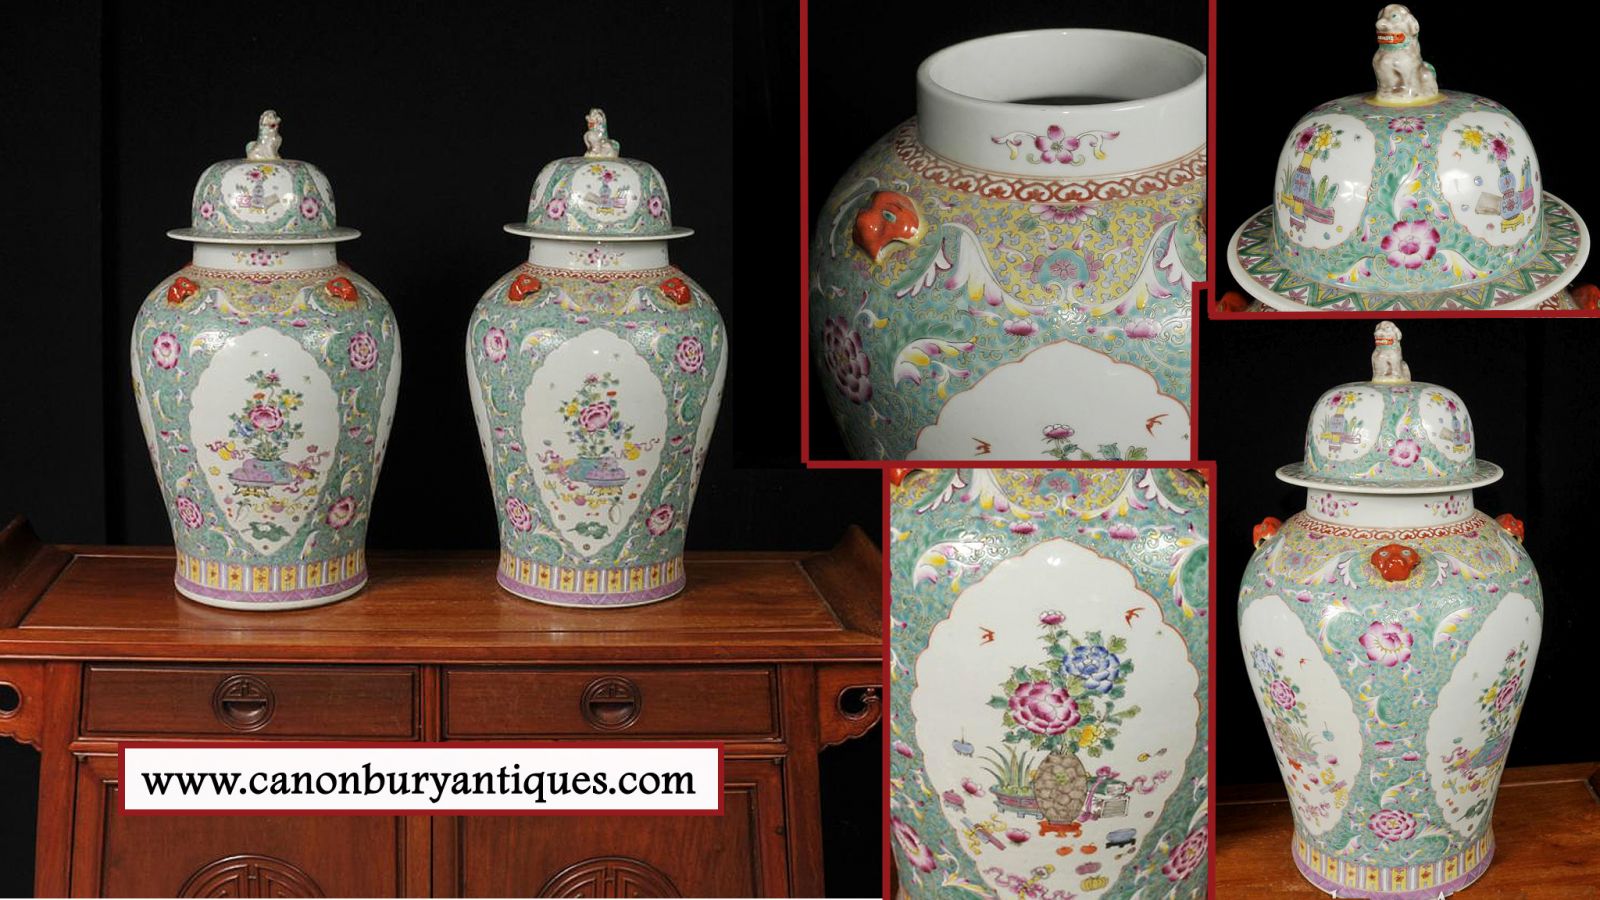 Chinese Porcelain Ginger Jars - Everything You Need to Know